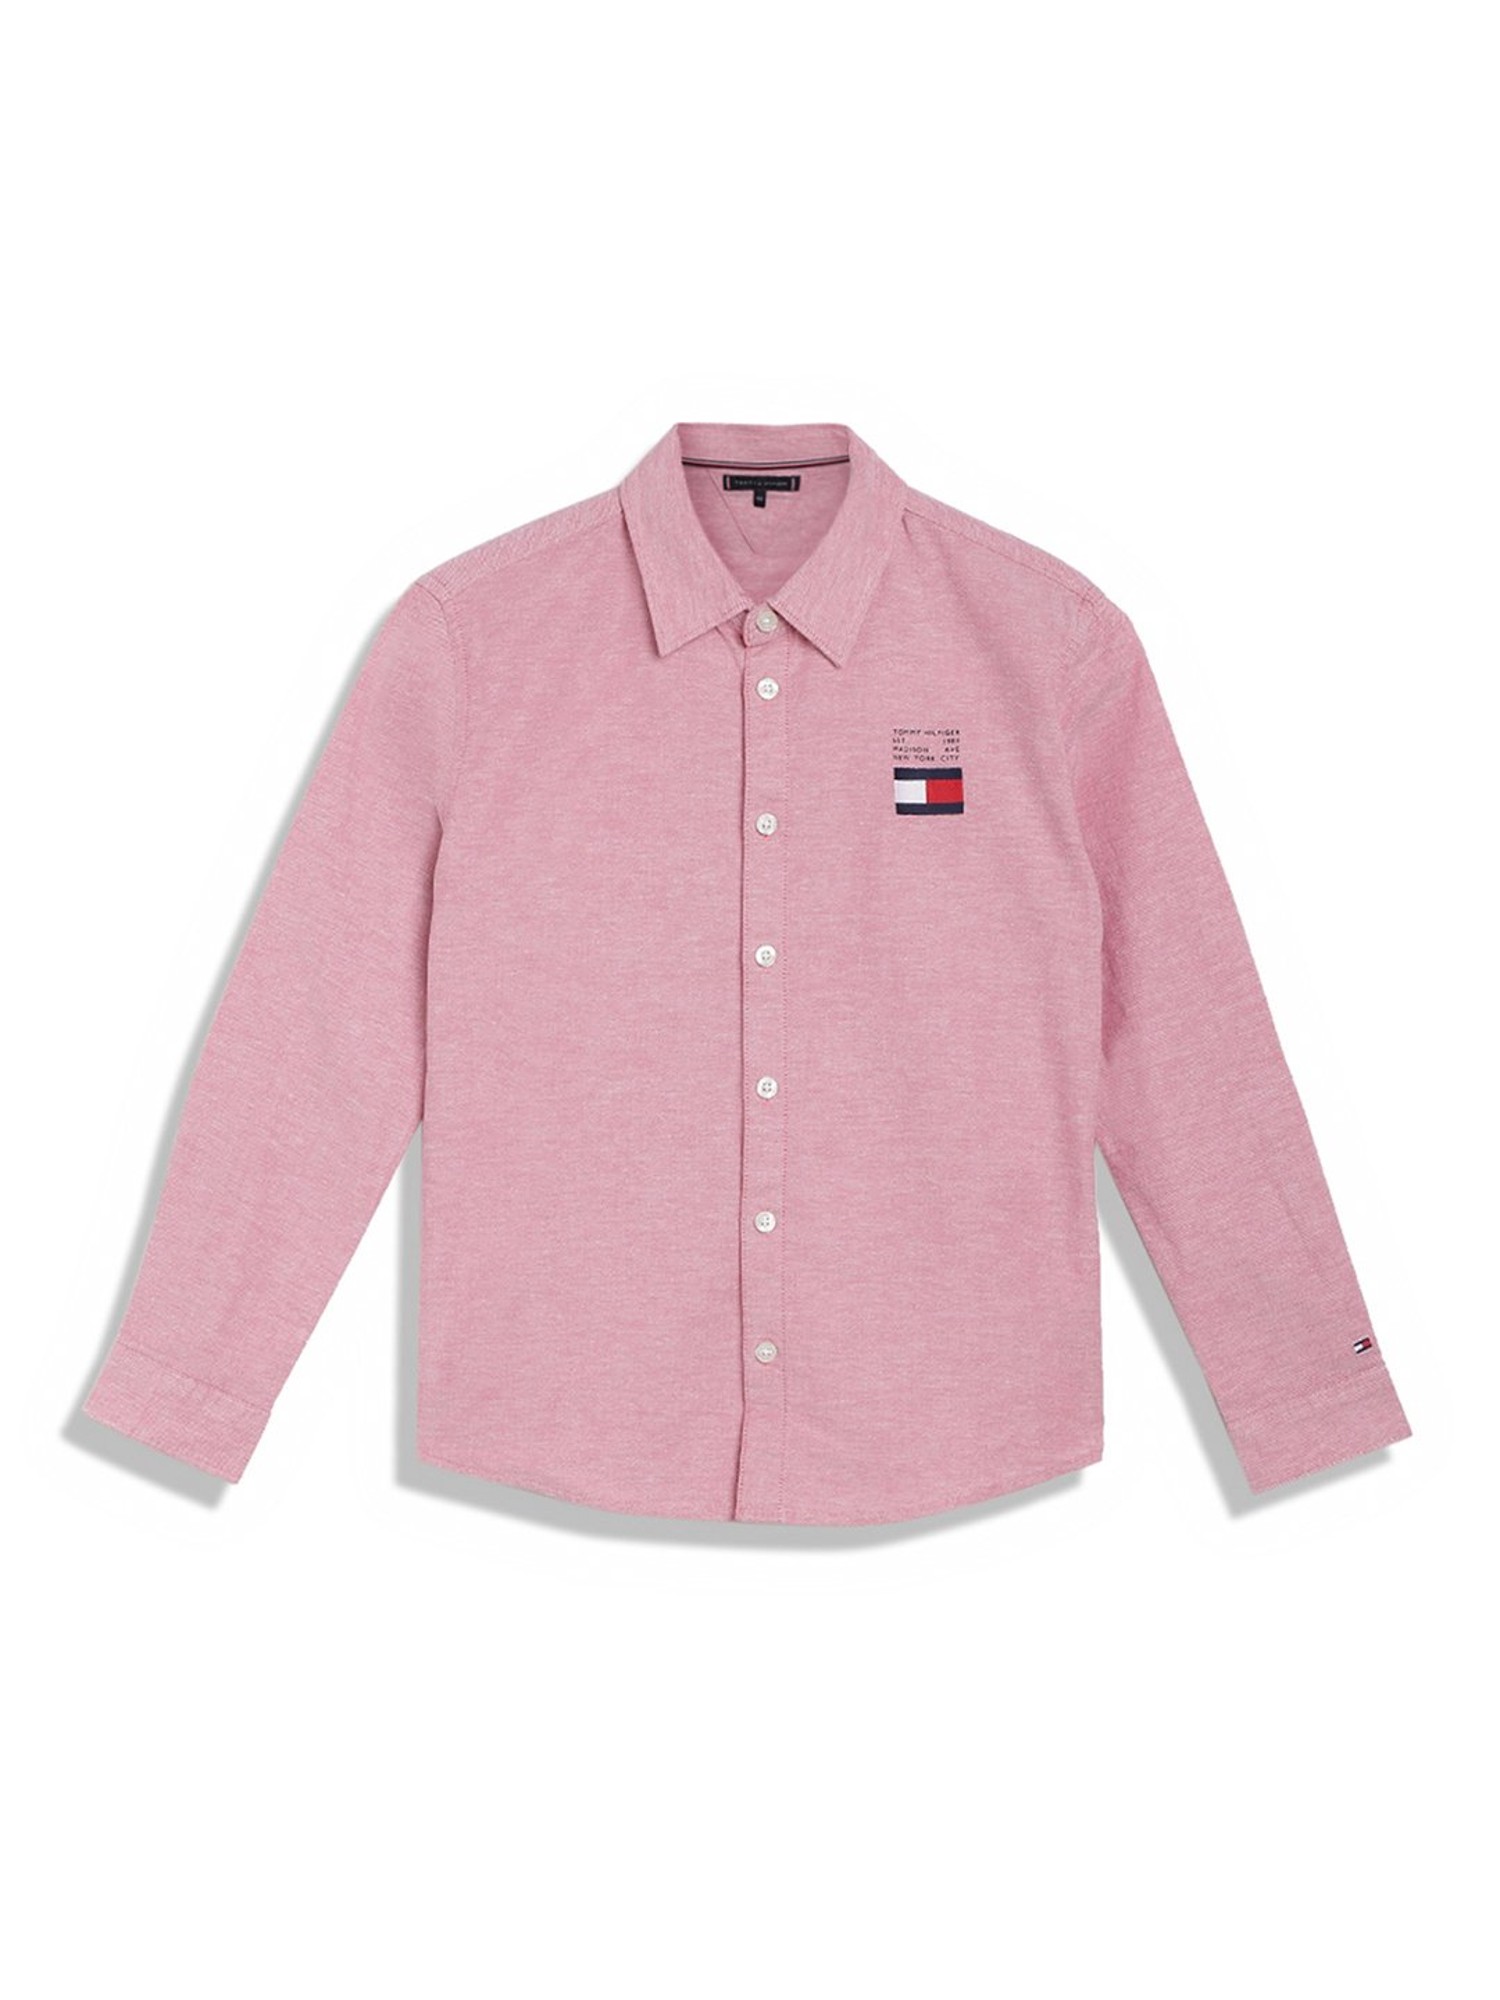 Tommy Hilfiger Shirt Solid Sleeves Kids Pink Full